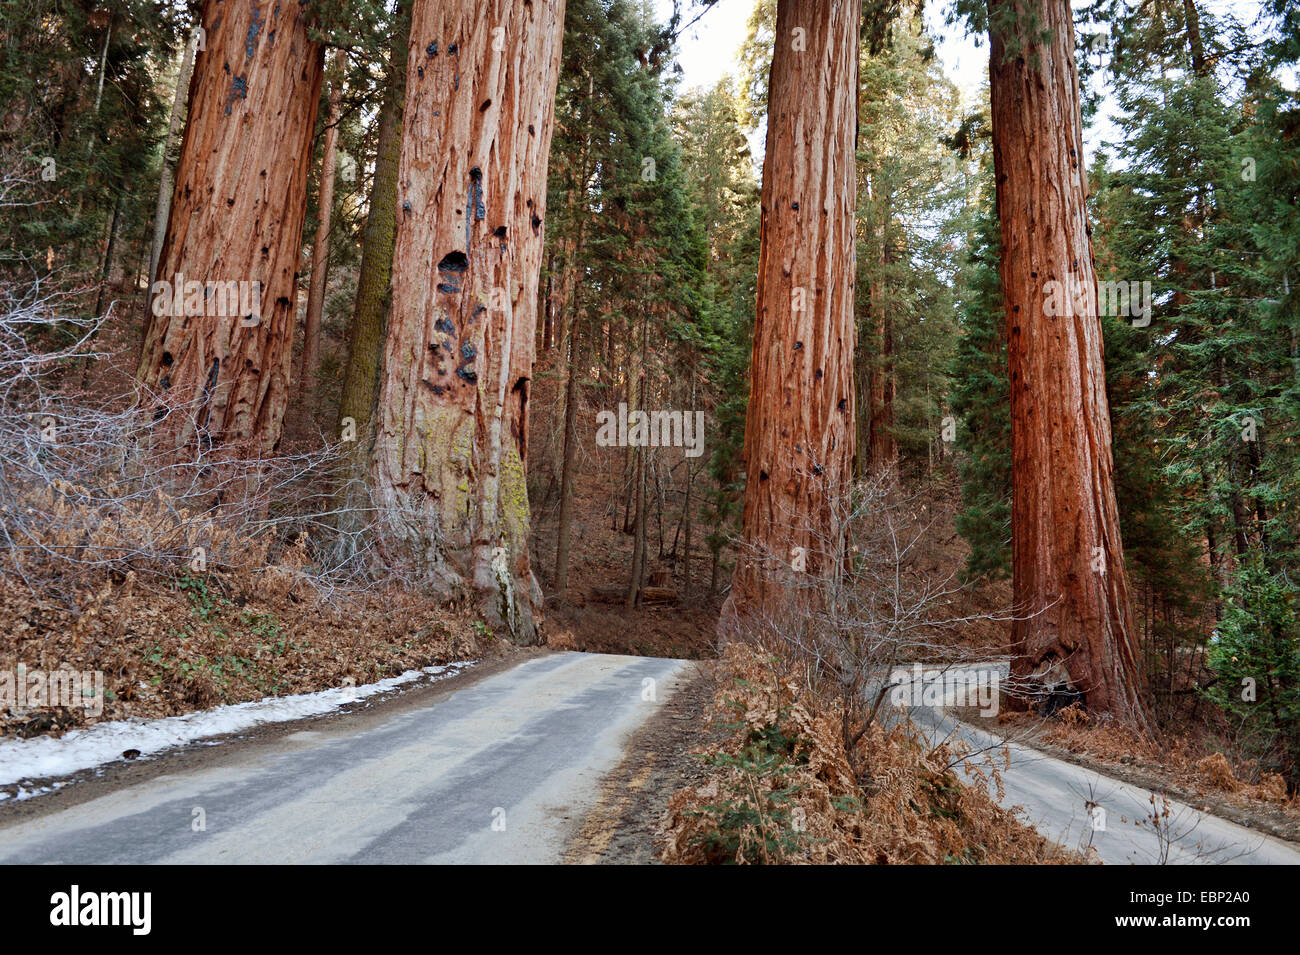 giant sequoia, giant redwood (Sequoiadendron giganteum), forest paths at the Sequoia National Park, USA, California, Sequoia National Park Stock Photo